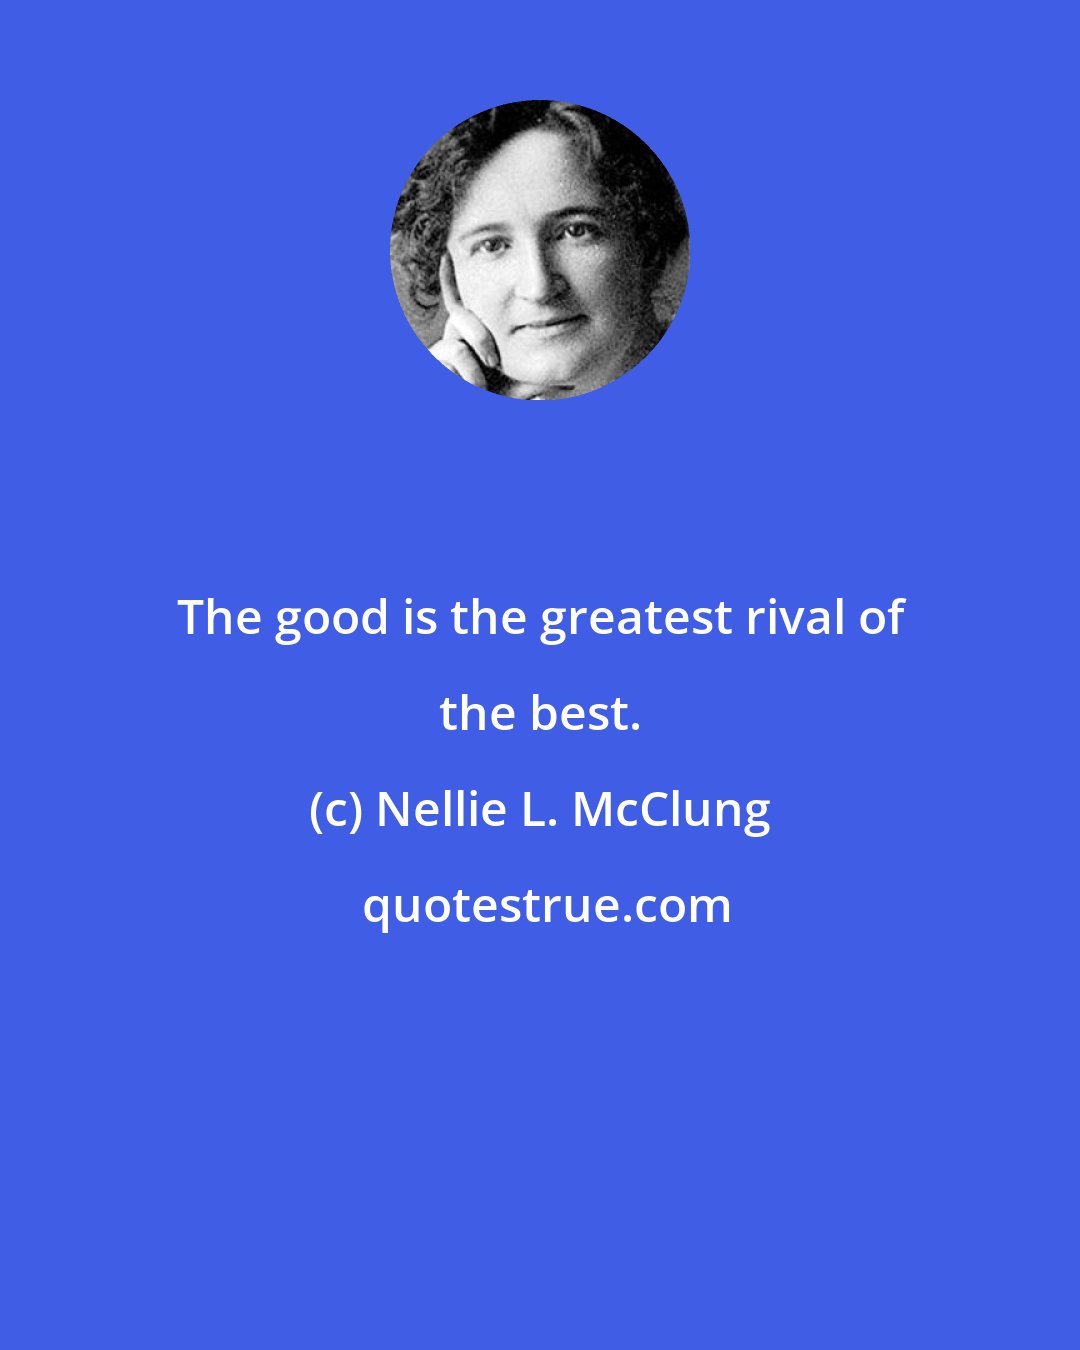 Nellie L. McClung: The good is the greatest rival of the best.